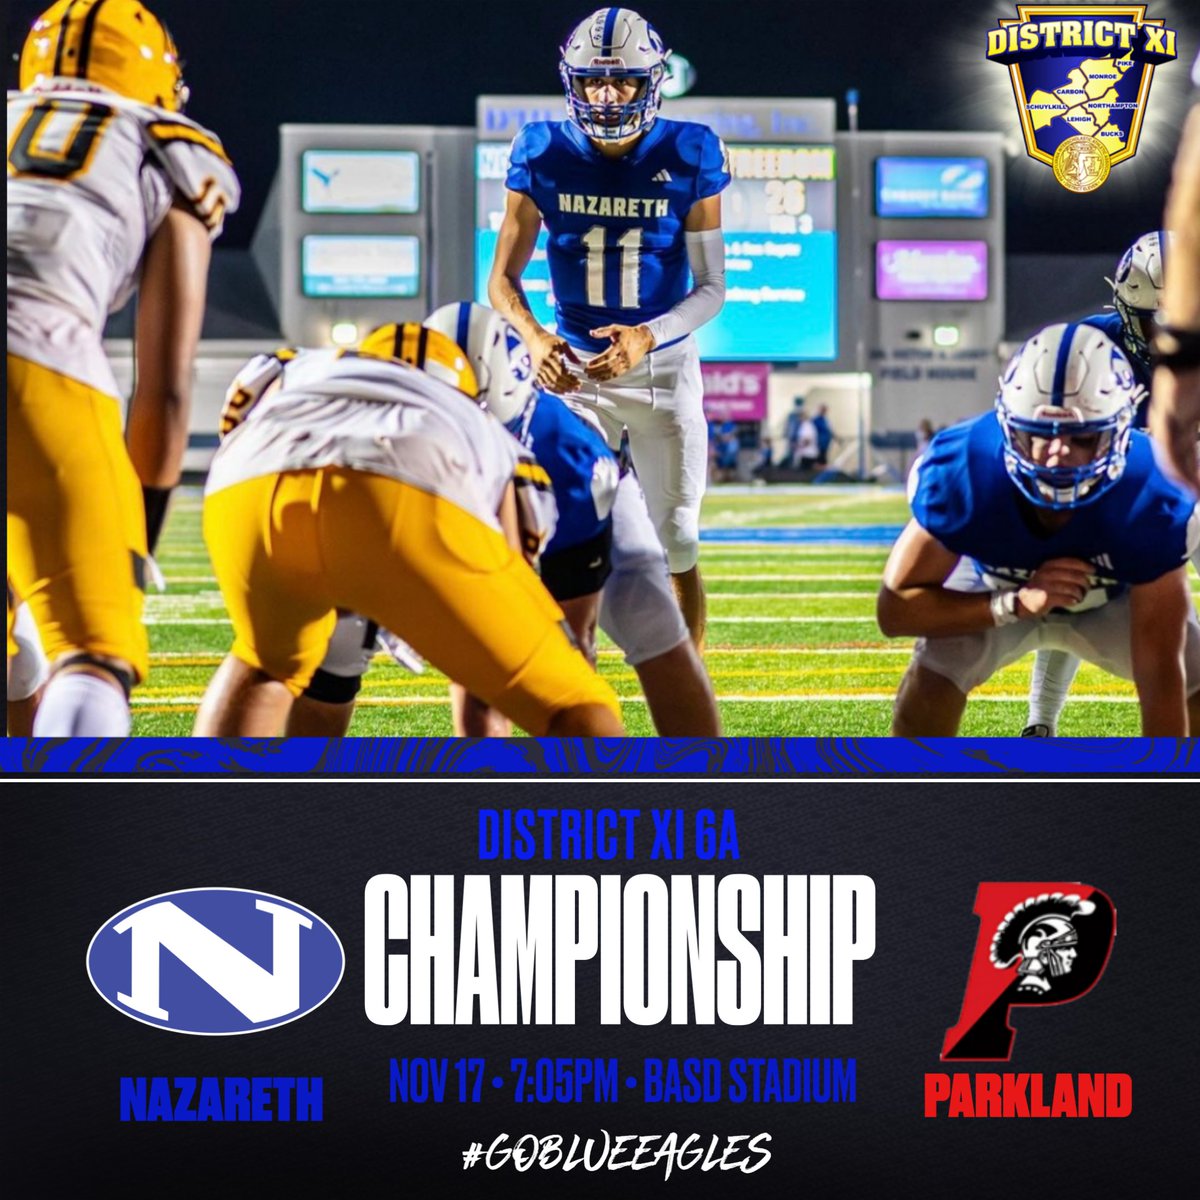 DISTRICT XI 6A CHAMPIONSHIP: All tickets for the District XI 6A Championship game vs Parkland @ BASD Stadium on November 17th must be purchased online. NO cash sales at the gate. All tickets are $7 / Senior Citizens 65+ are free w/valid ID. #GoBlueEagles districtxi.hometownticketing.com/embed/event/630